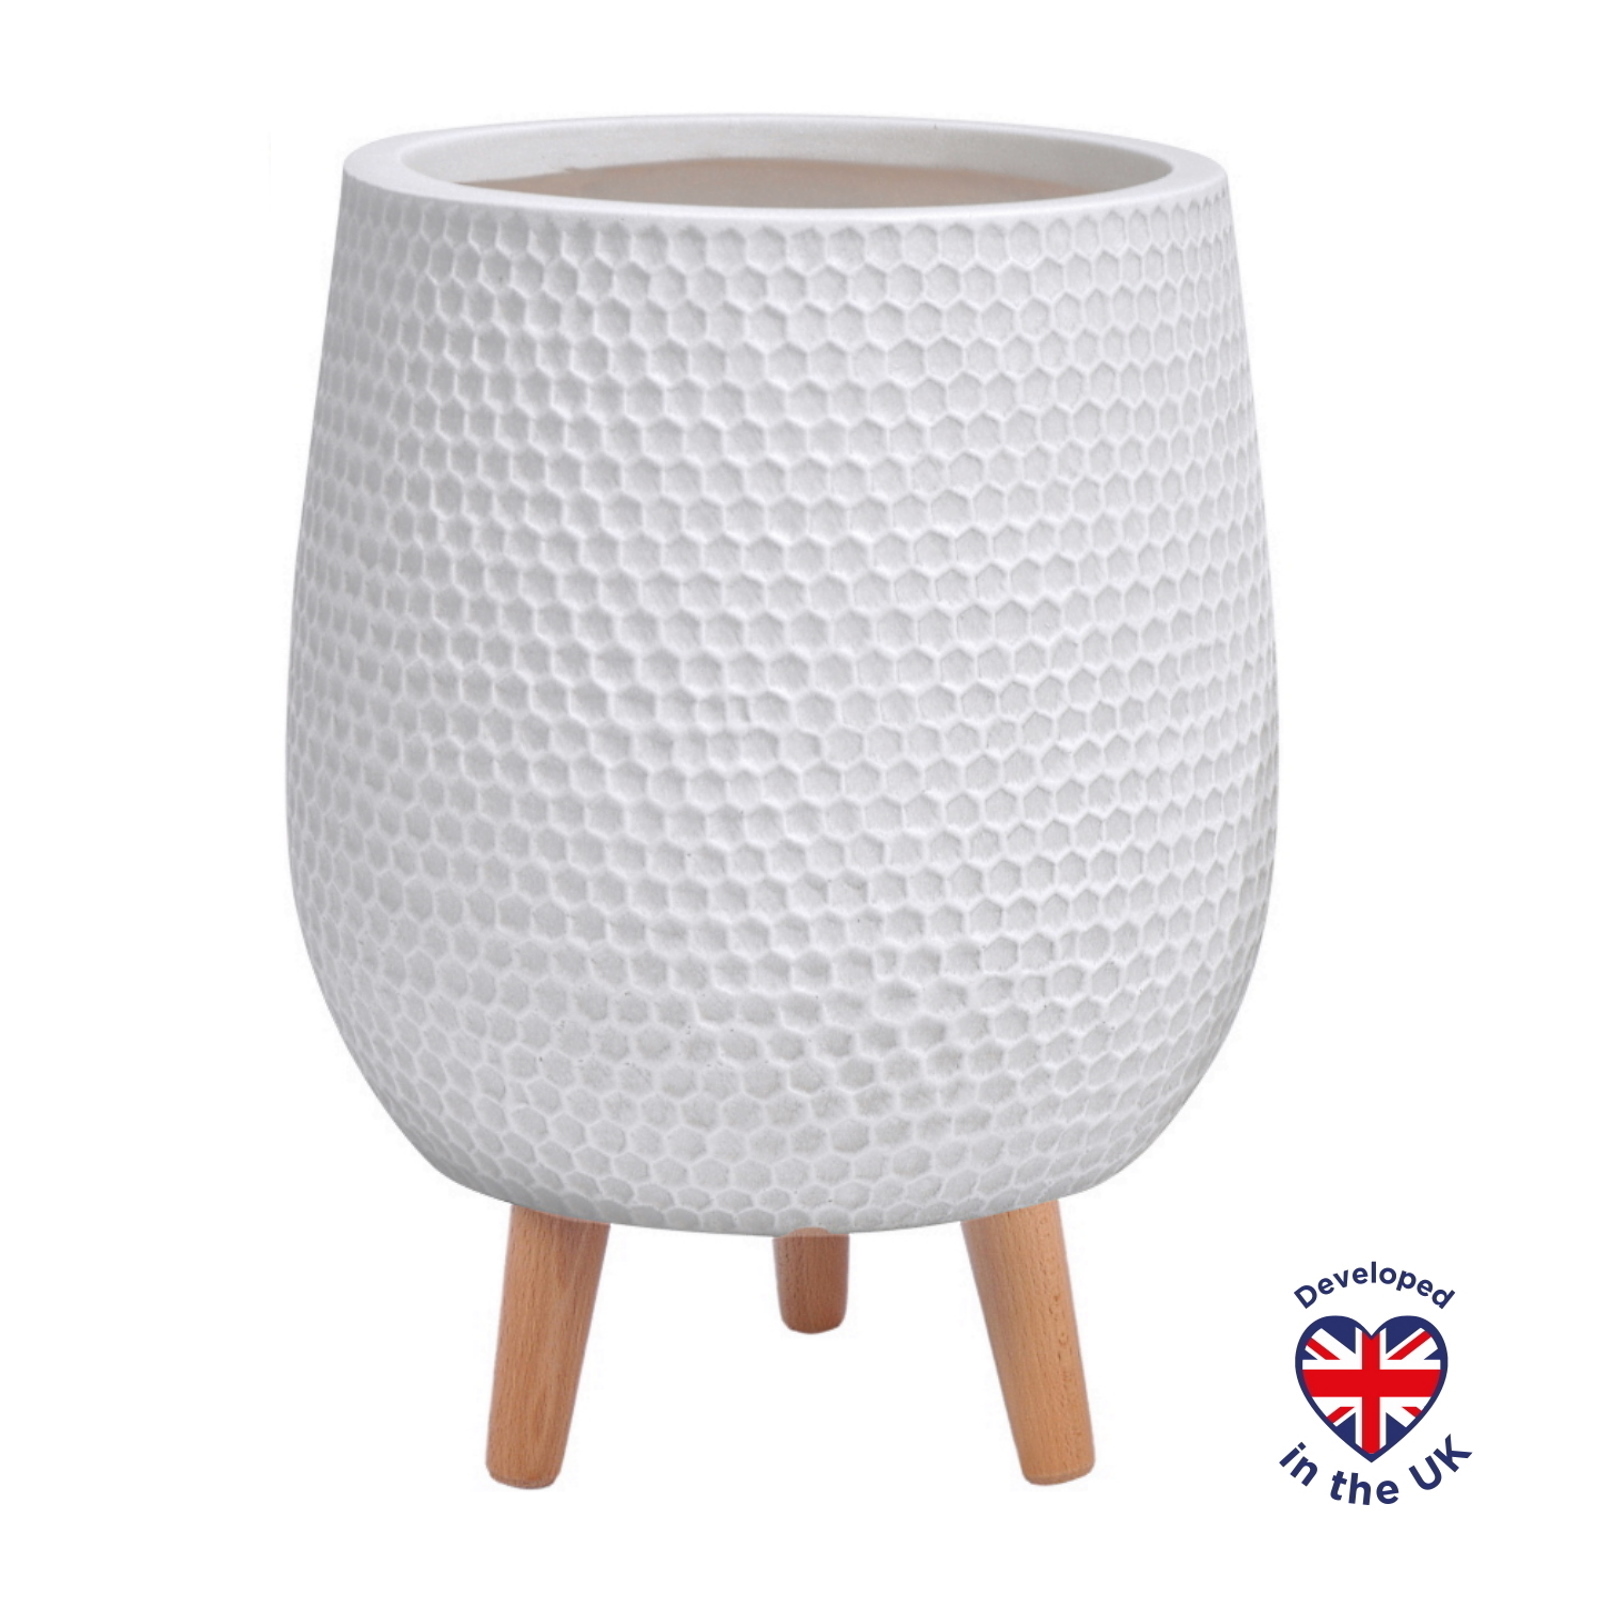 Honeycomb Style White Indoor Egg Planter with Legs D44 H55 cm, 59.6 ltrs Cap.